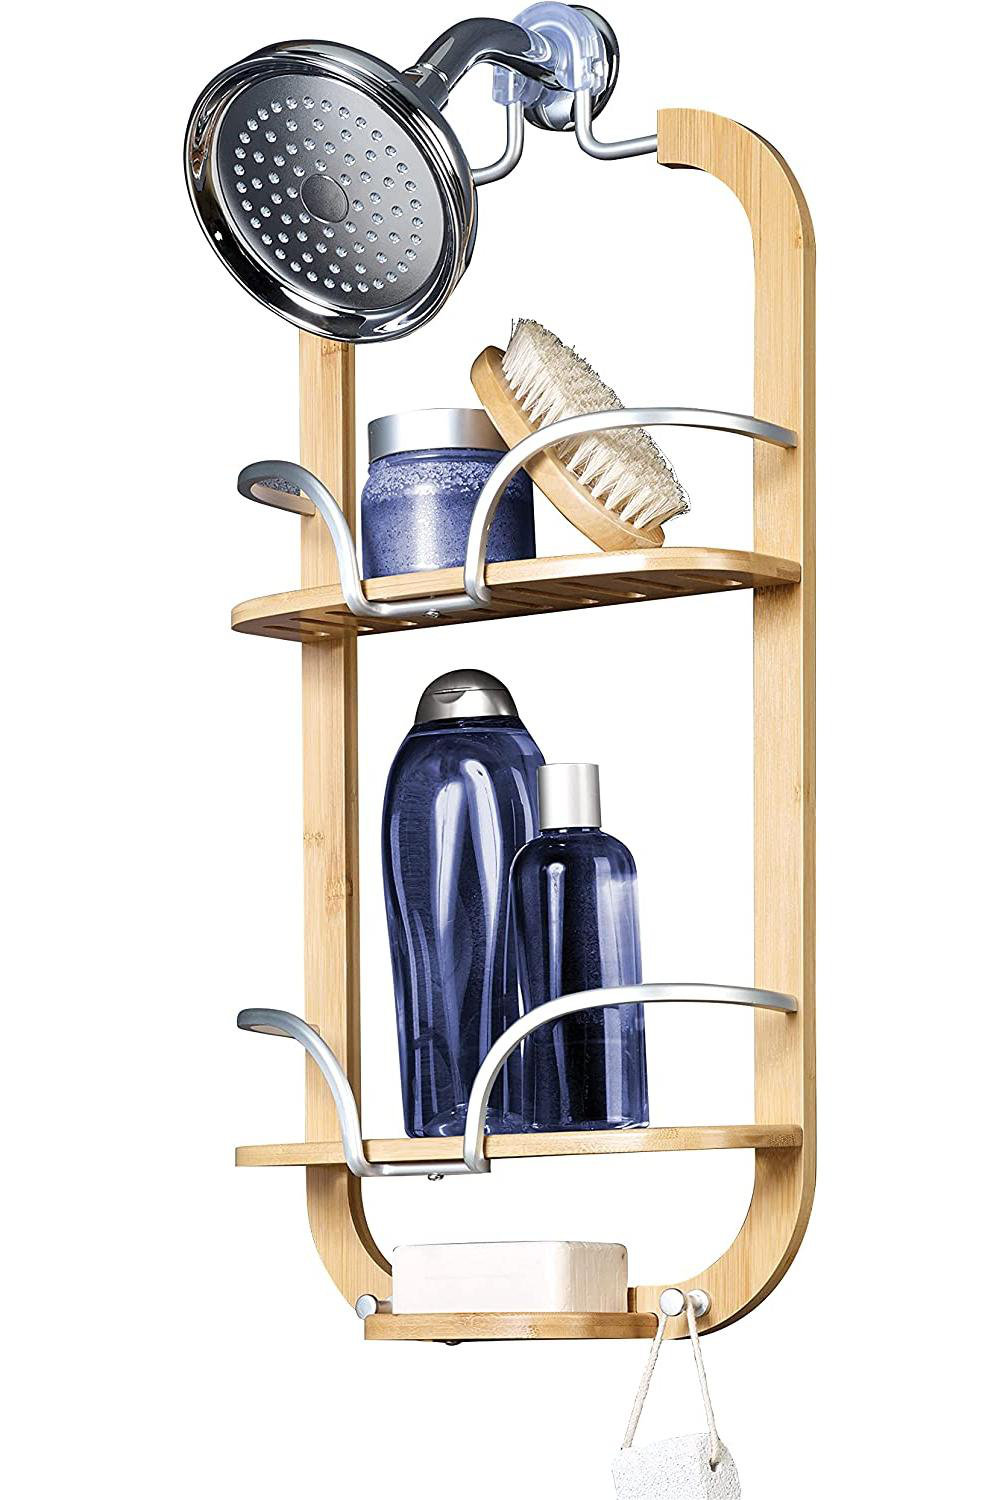 Everly Quinn Hanging Shower Caddy